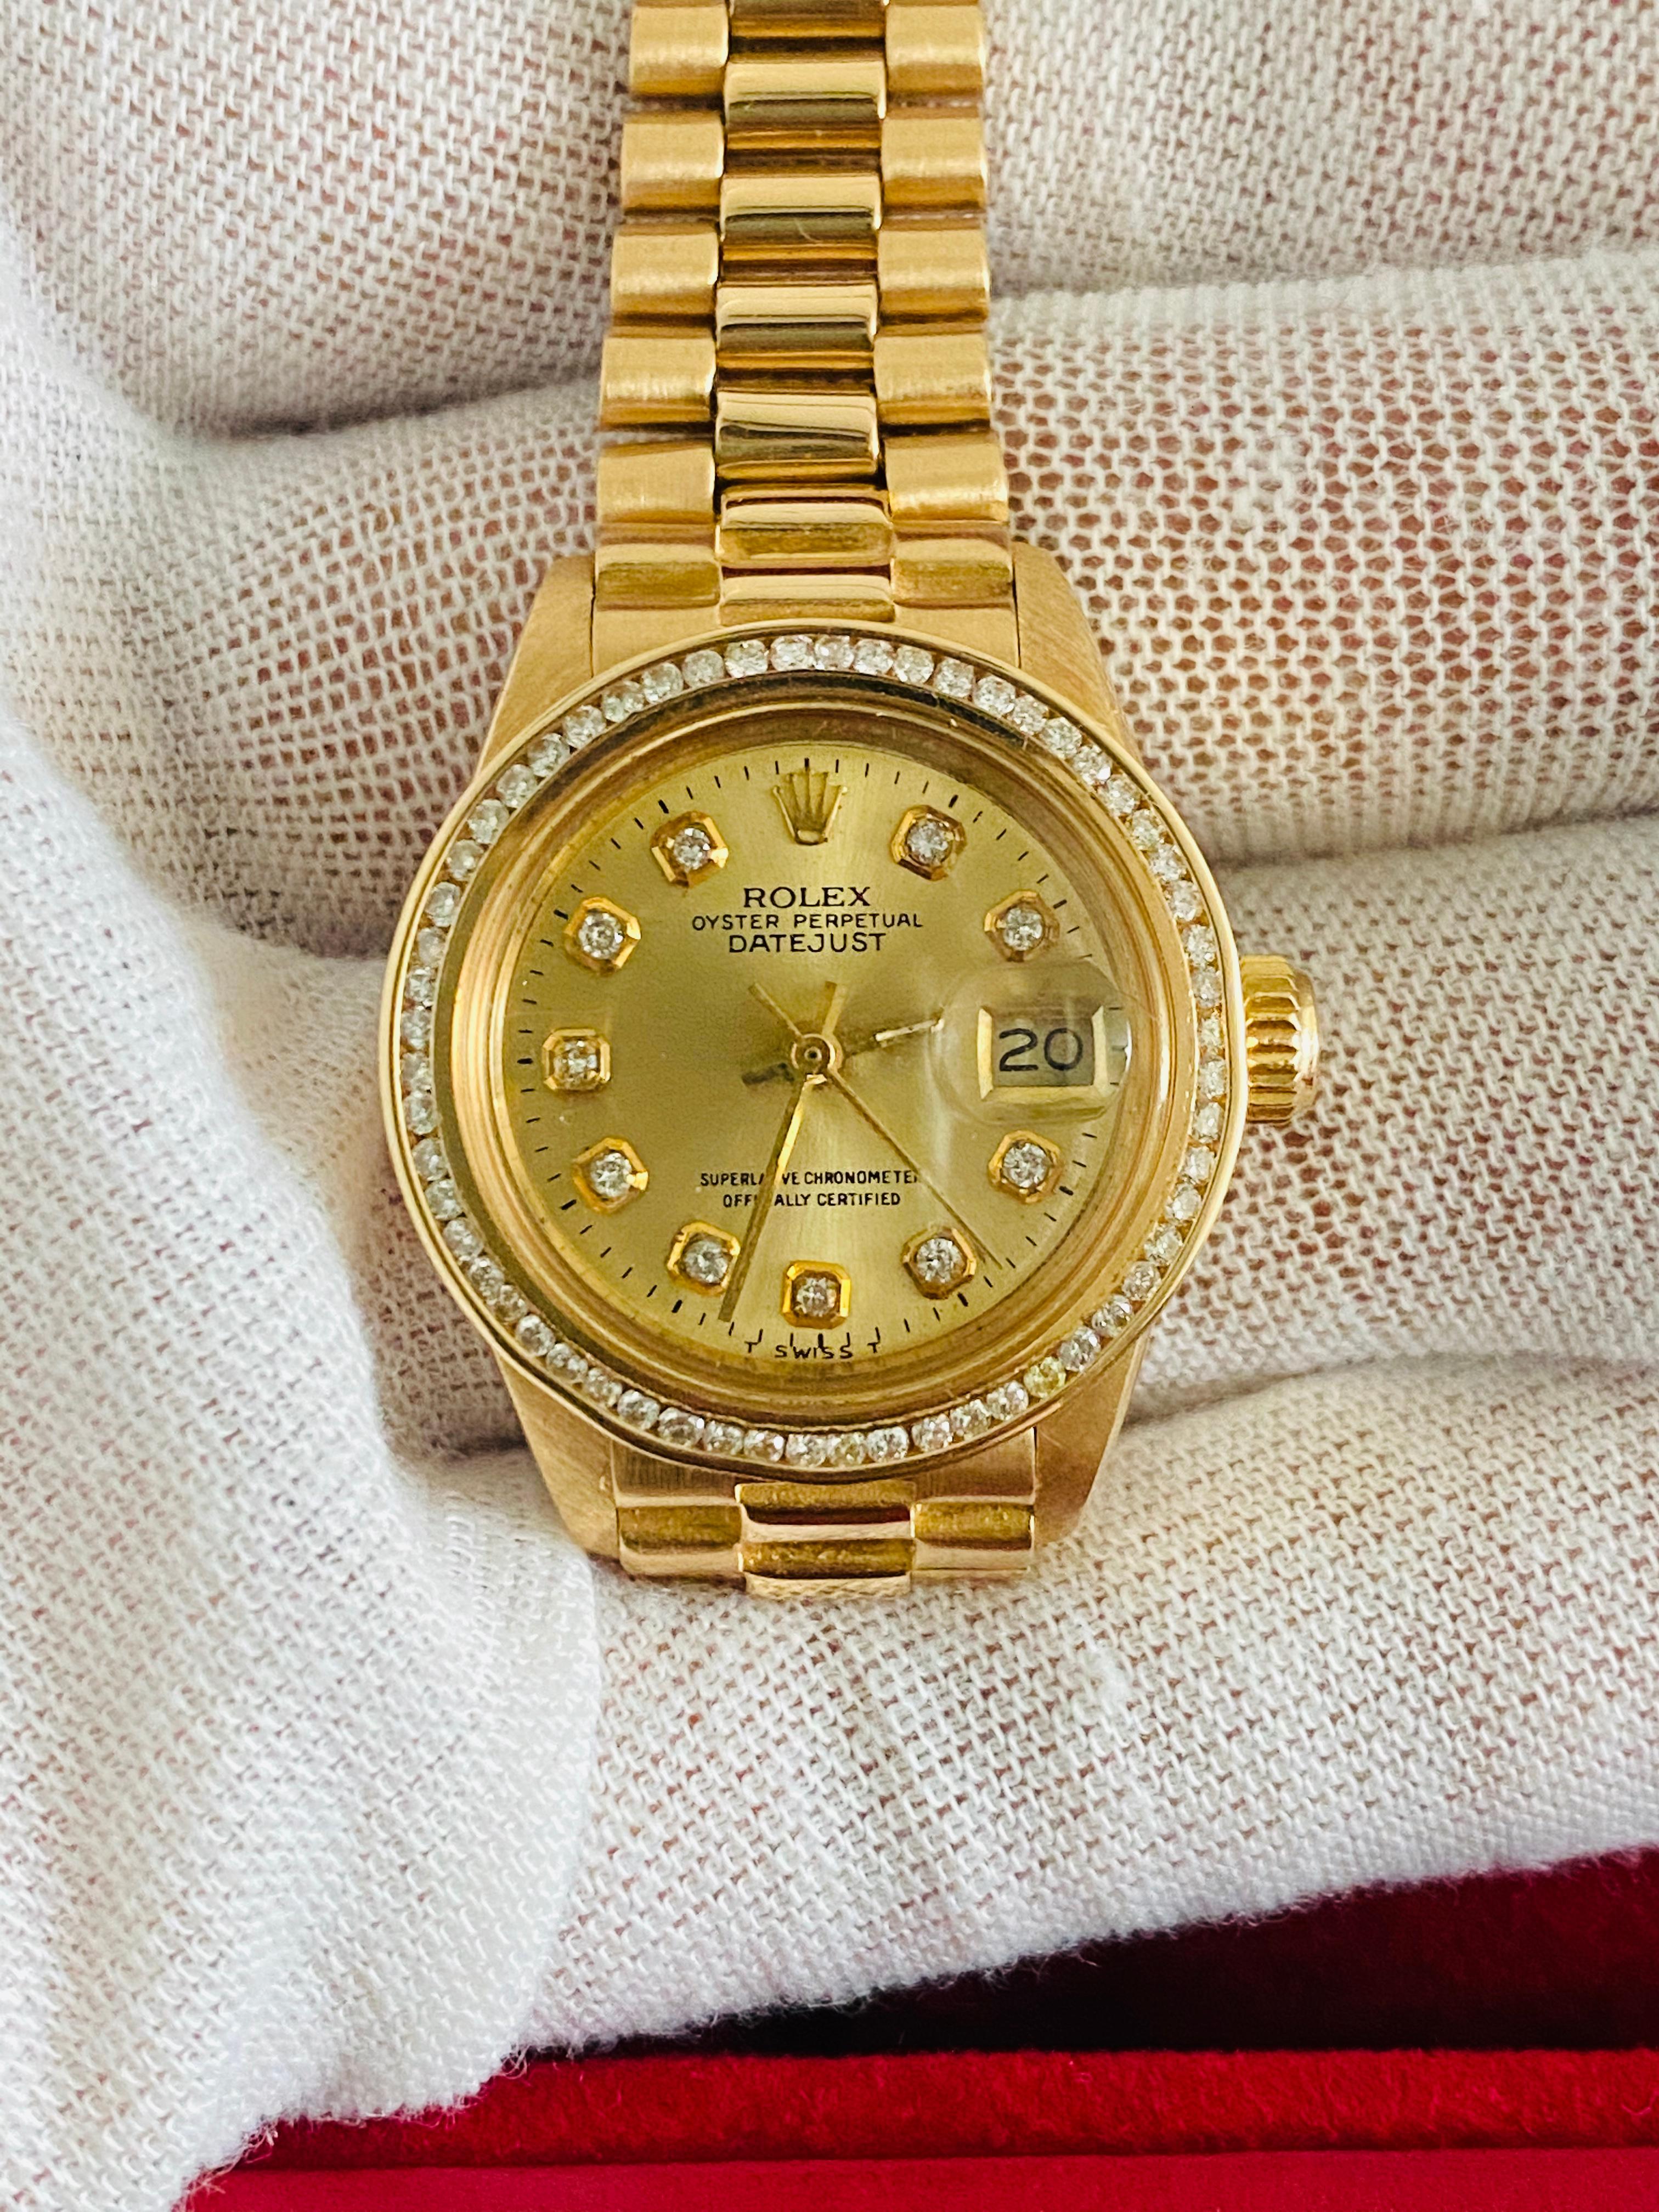 Rolex Oyster Prepetual Datejust Diamond Dial Diamond Bezel Gold Watch In Good Condition For Sale In Miami, FL